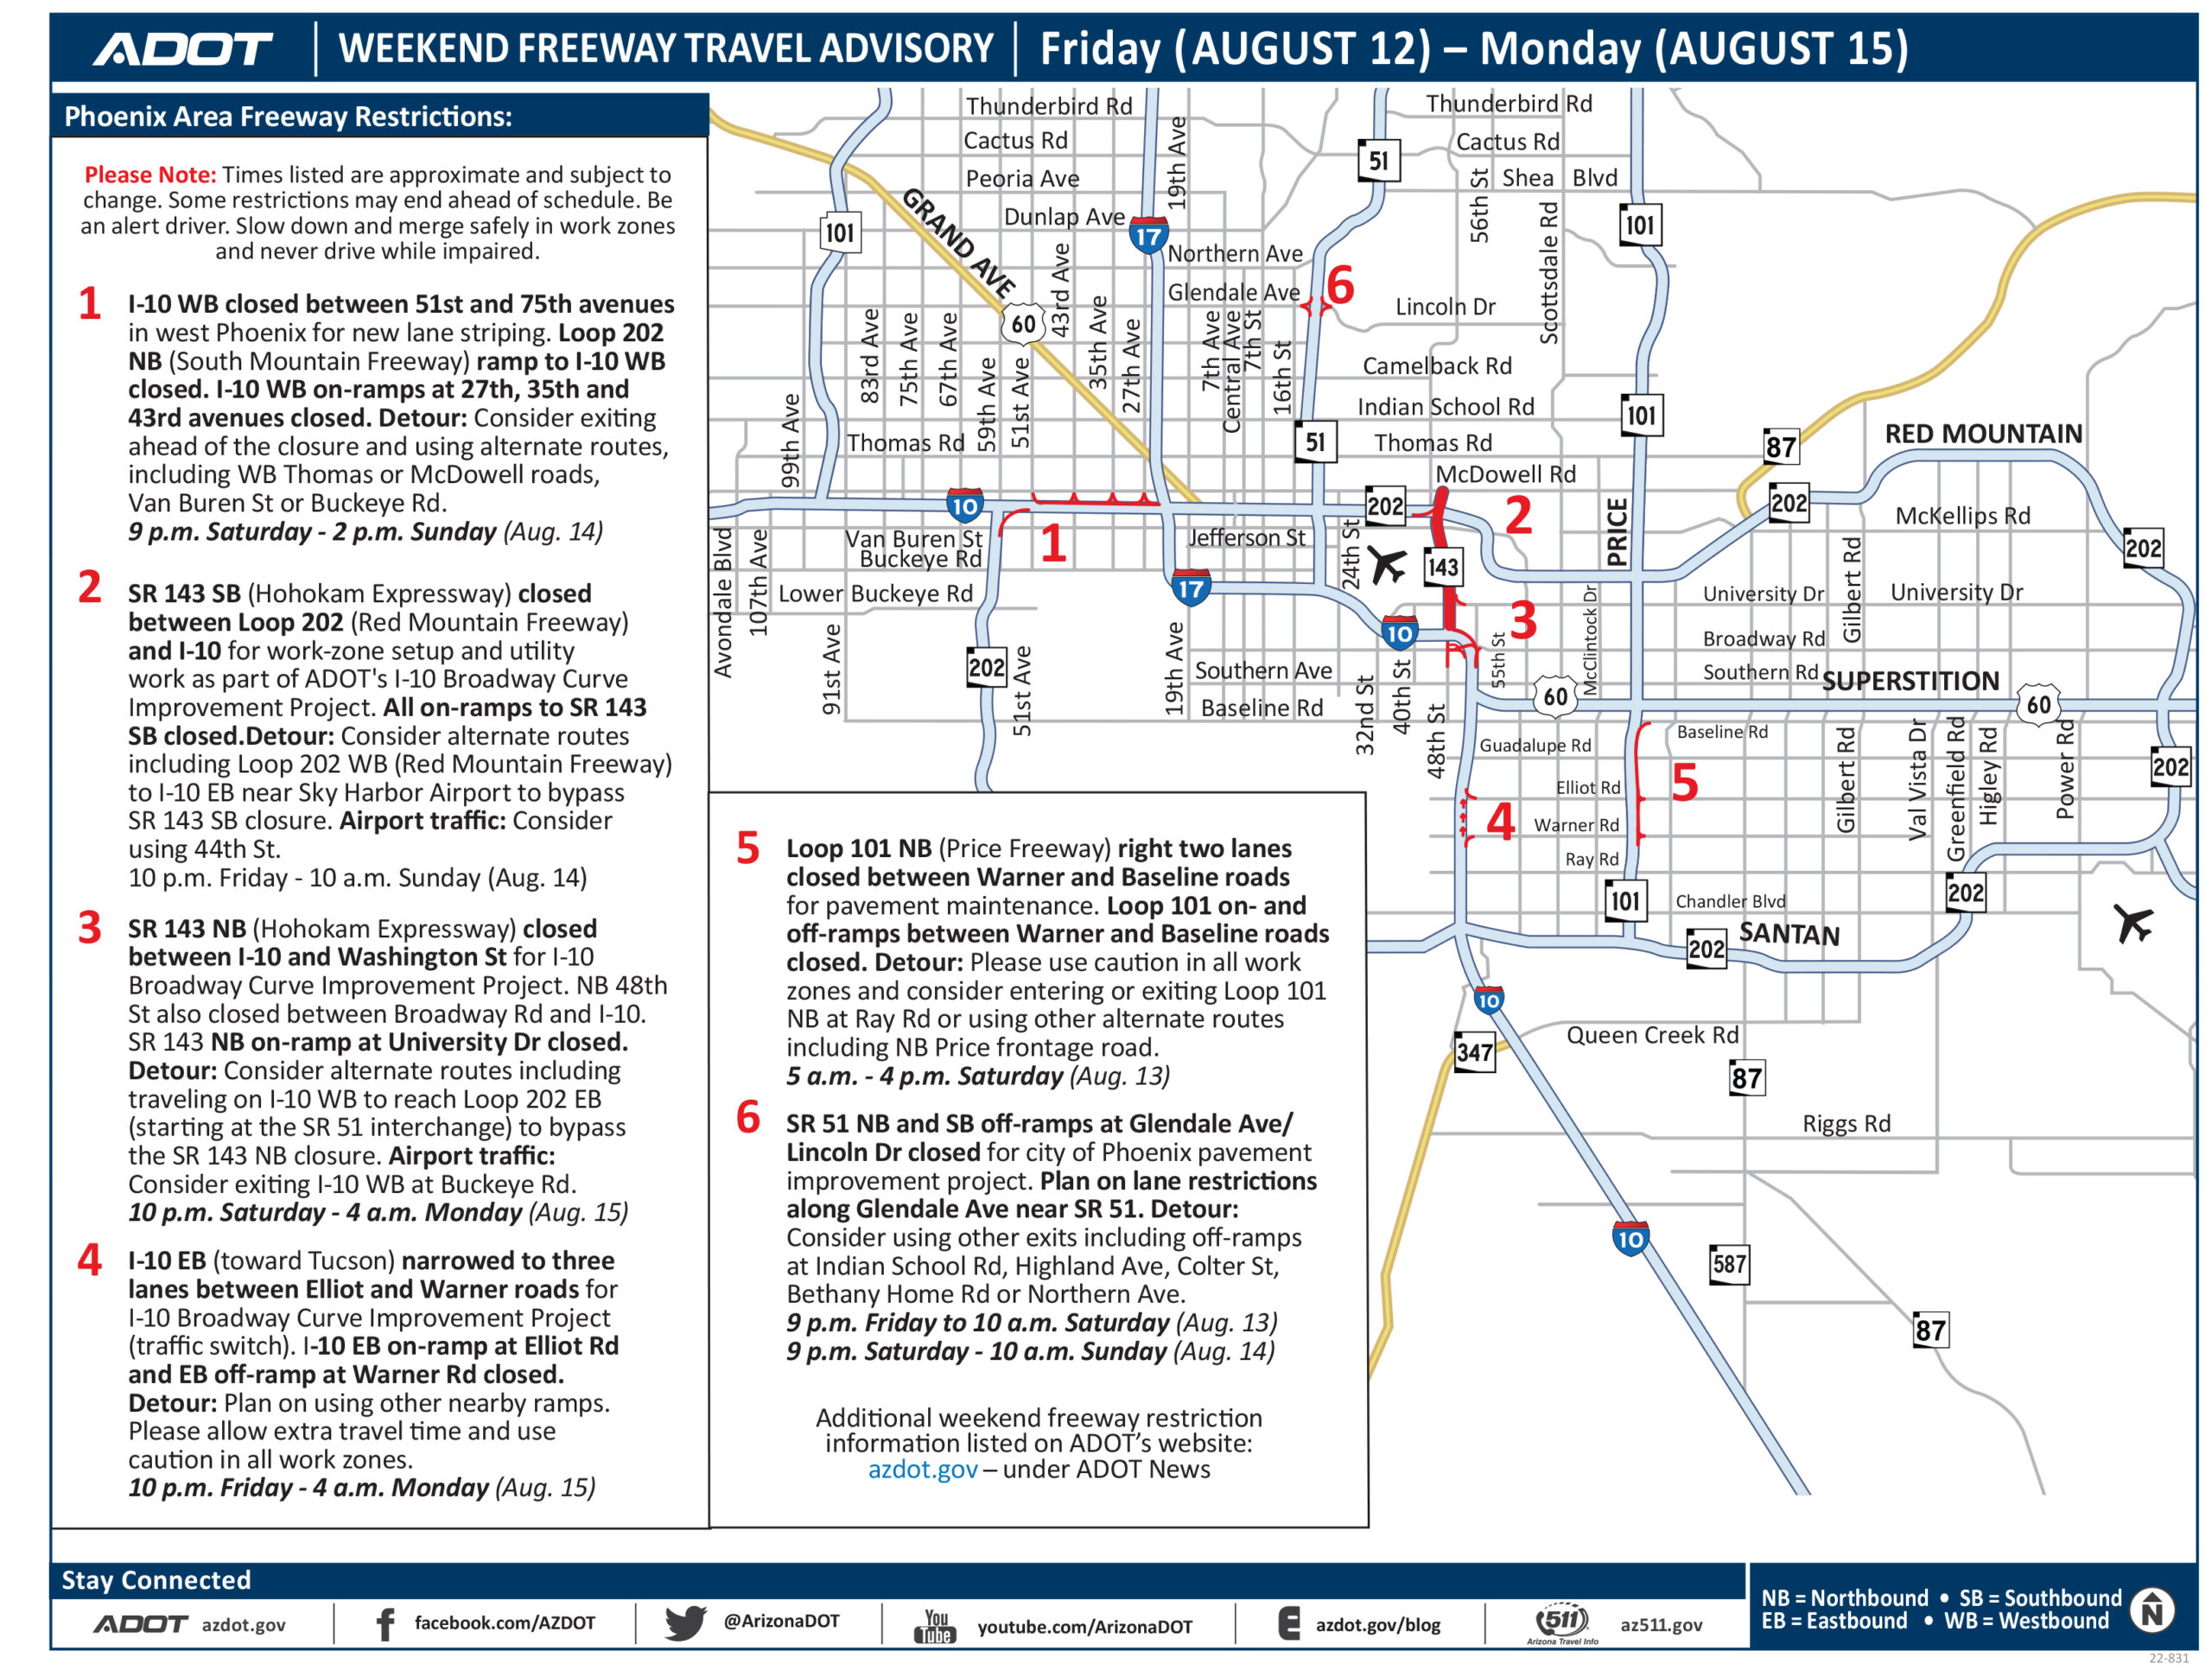 Phoenix-area freeway restrictions and closures for Aug. 12–15